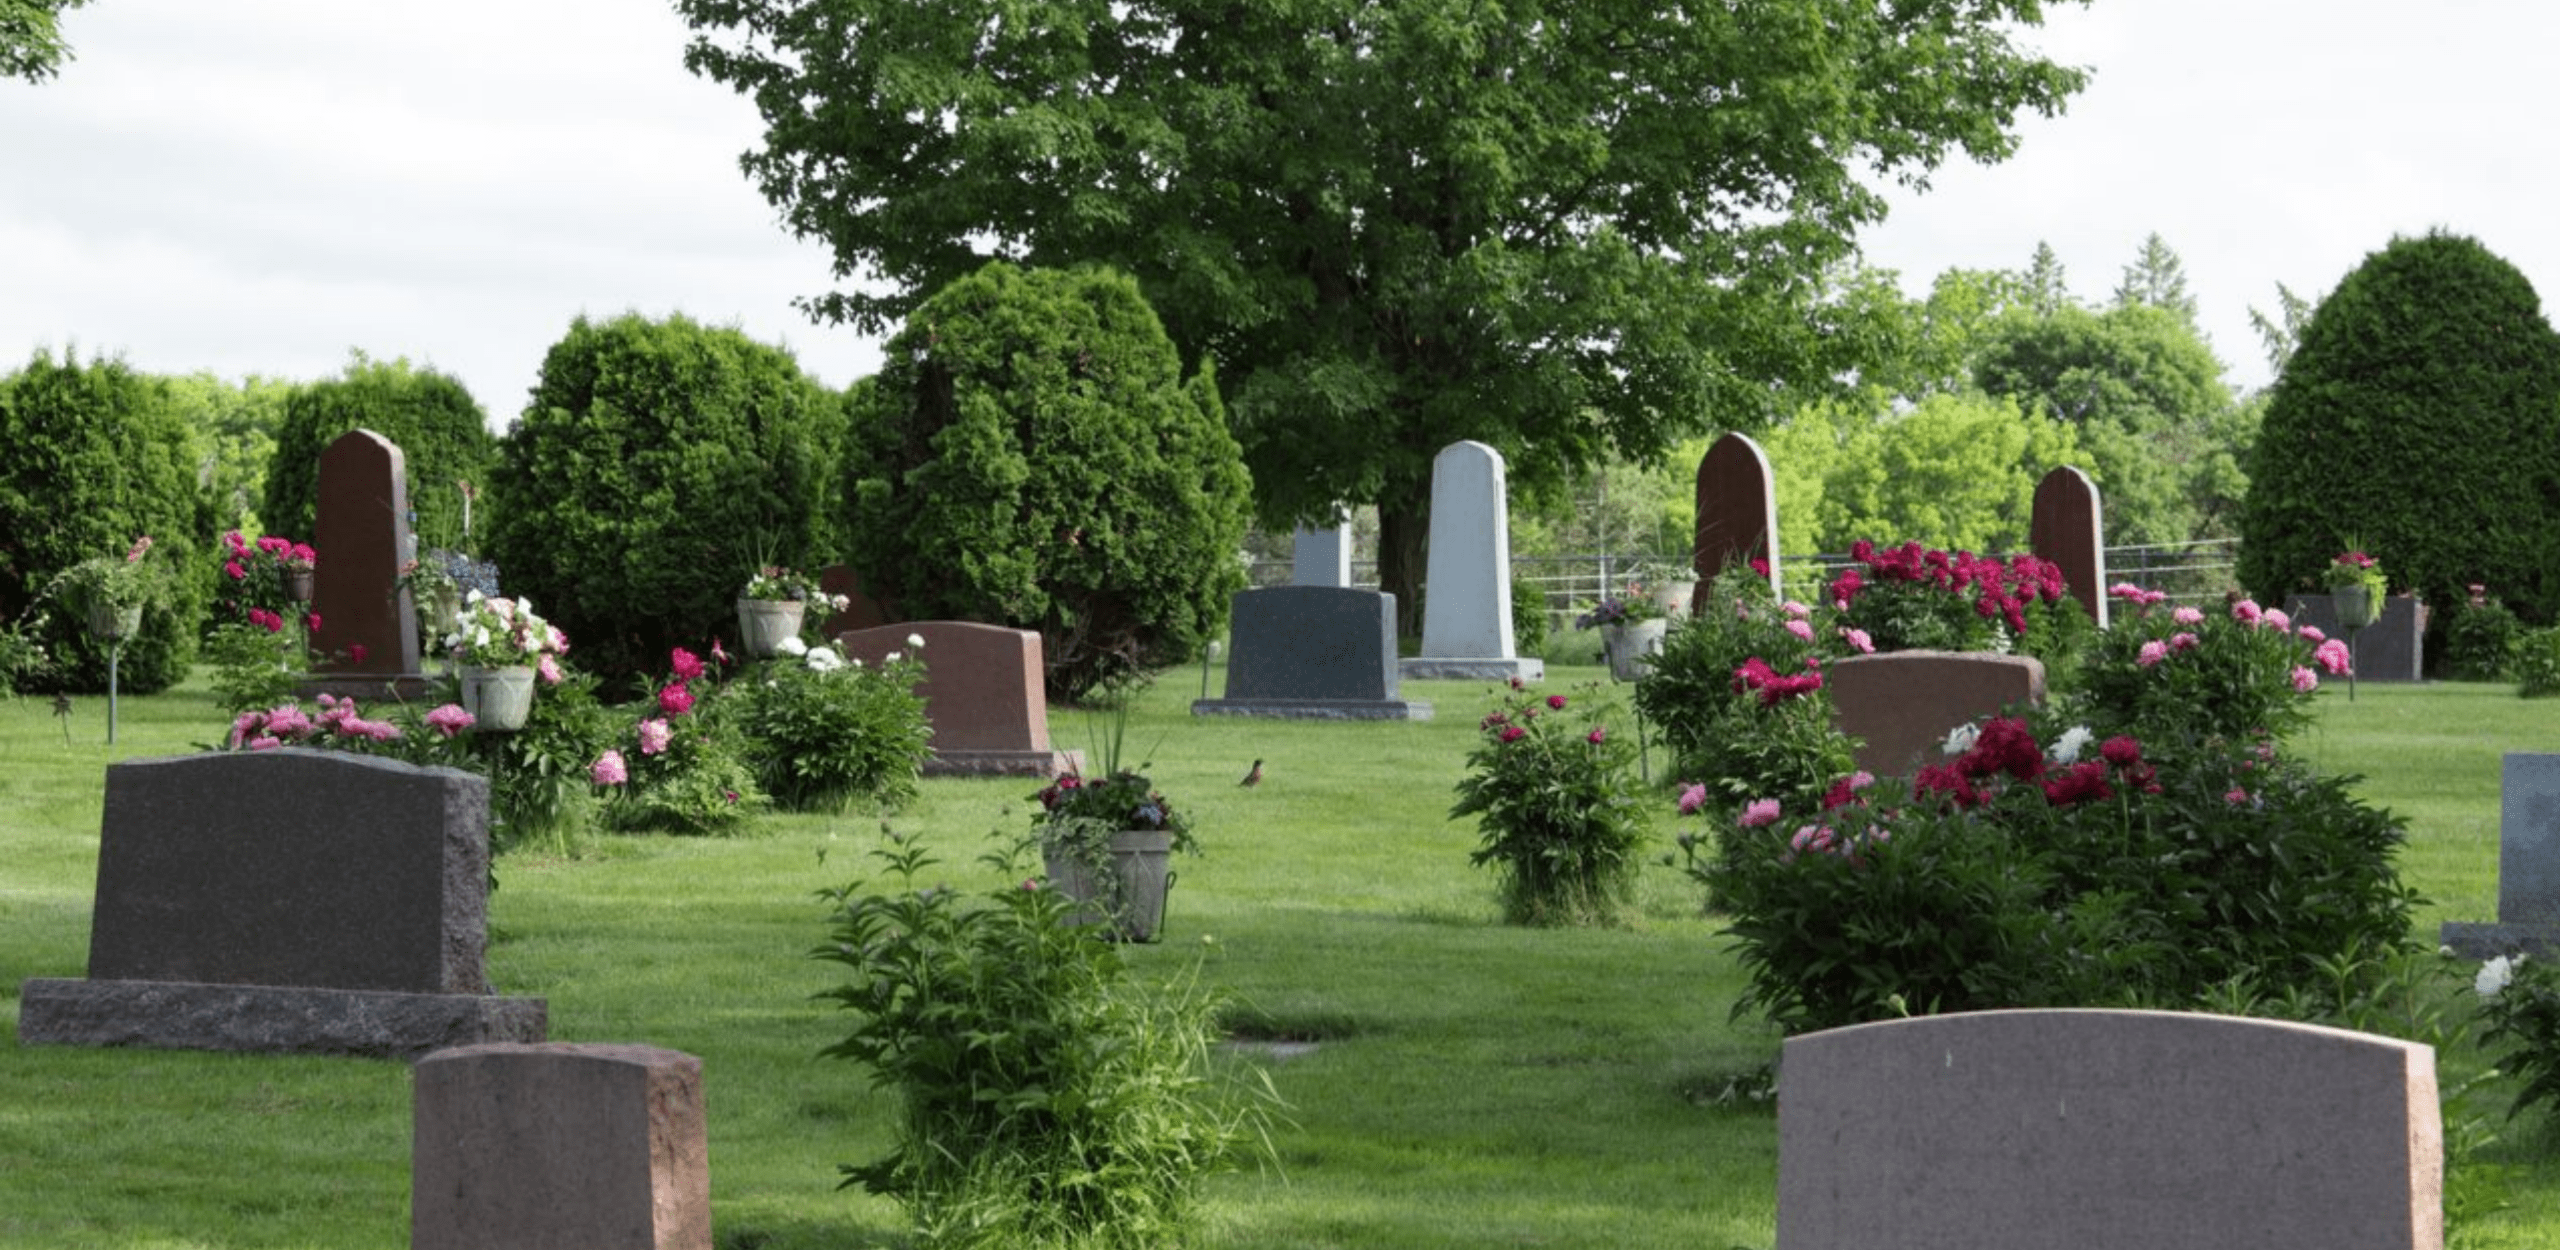 Beautiful cemetery with headstones and tree